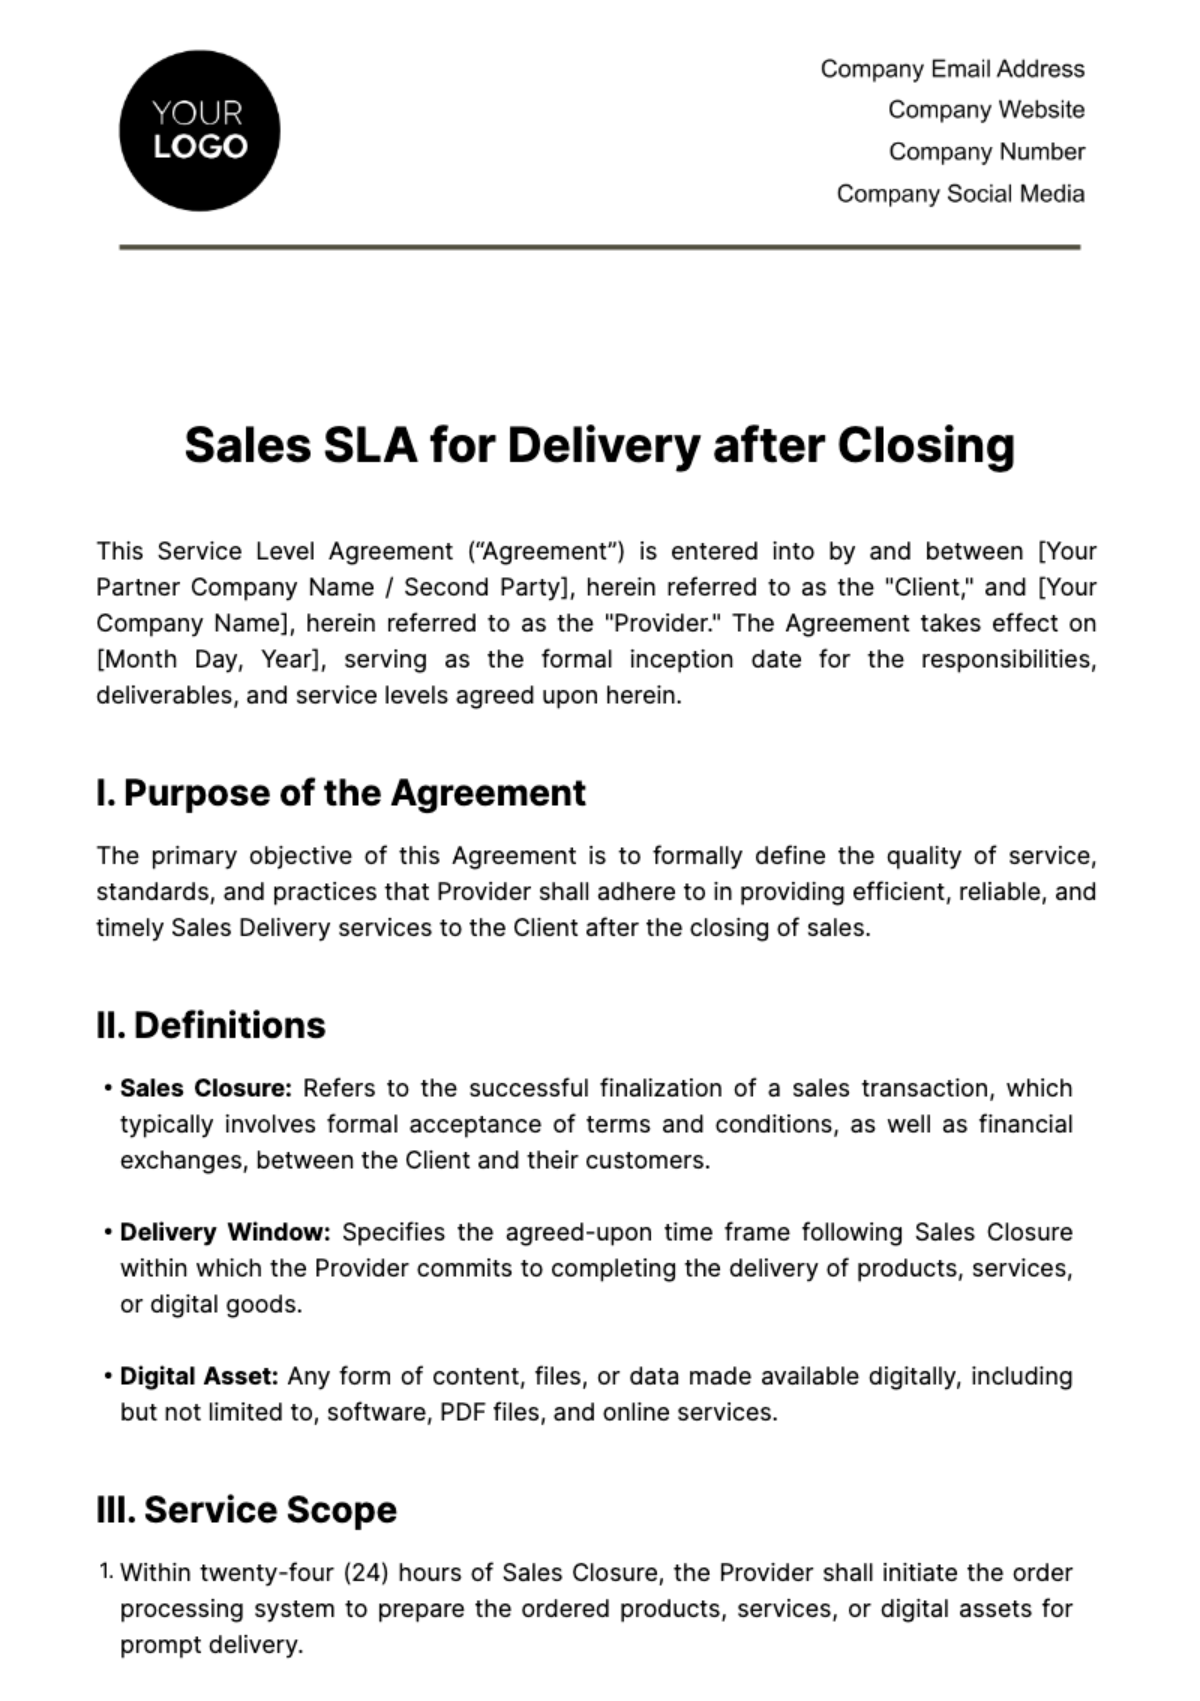 Free Sales SLA for Delivery after Closing Template